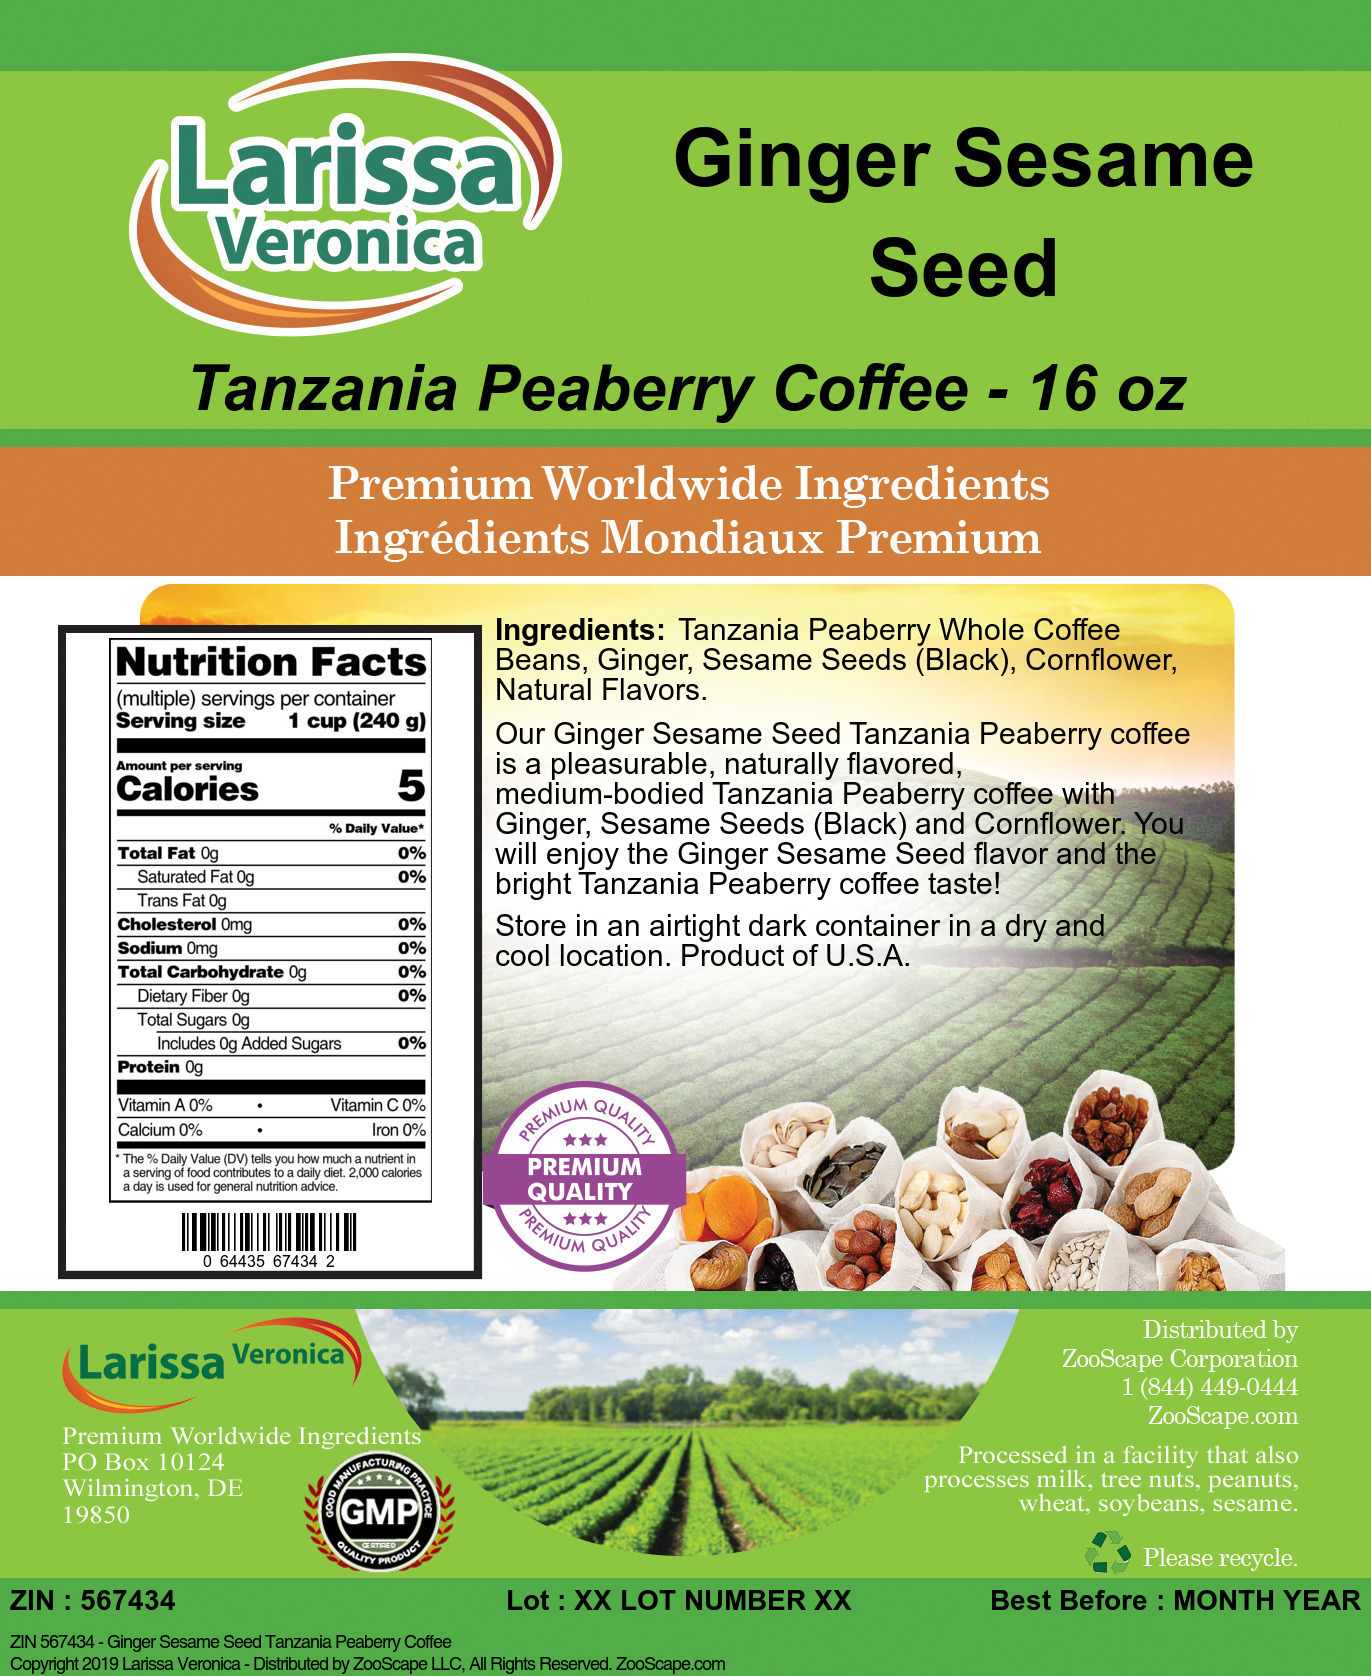 Ginger Sesame Seed Tanzania Peaberry Coffee - Label